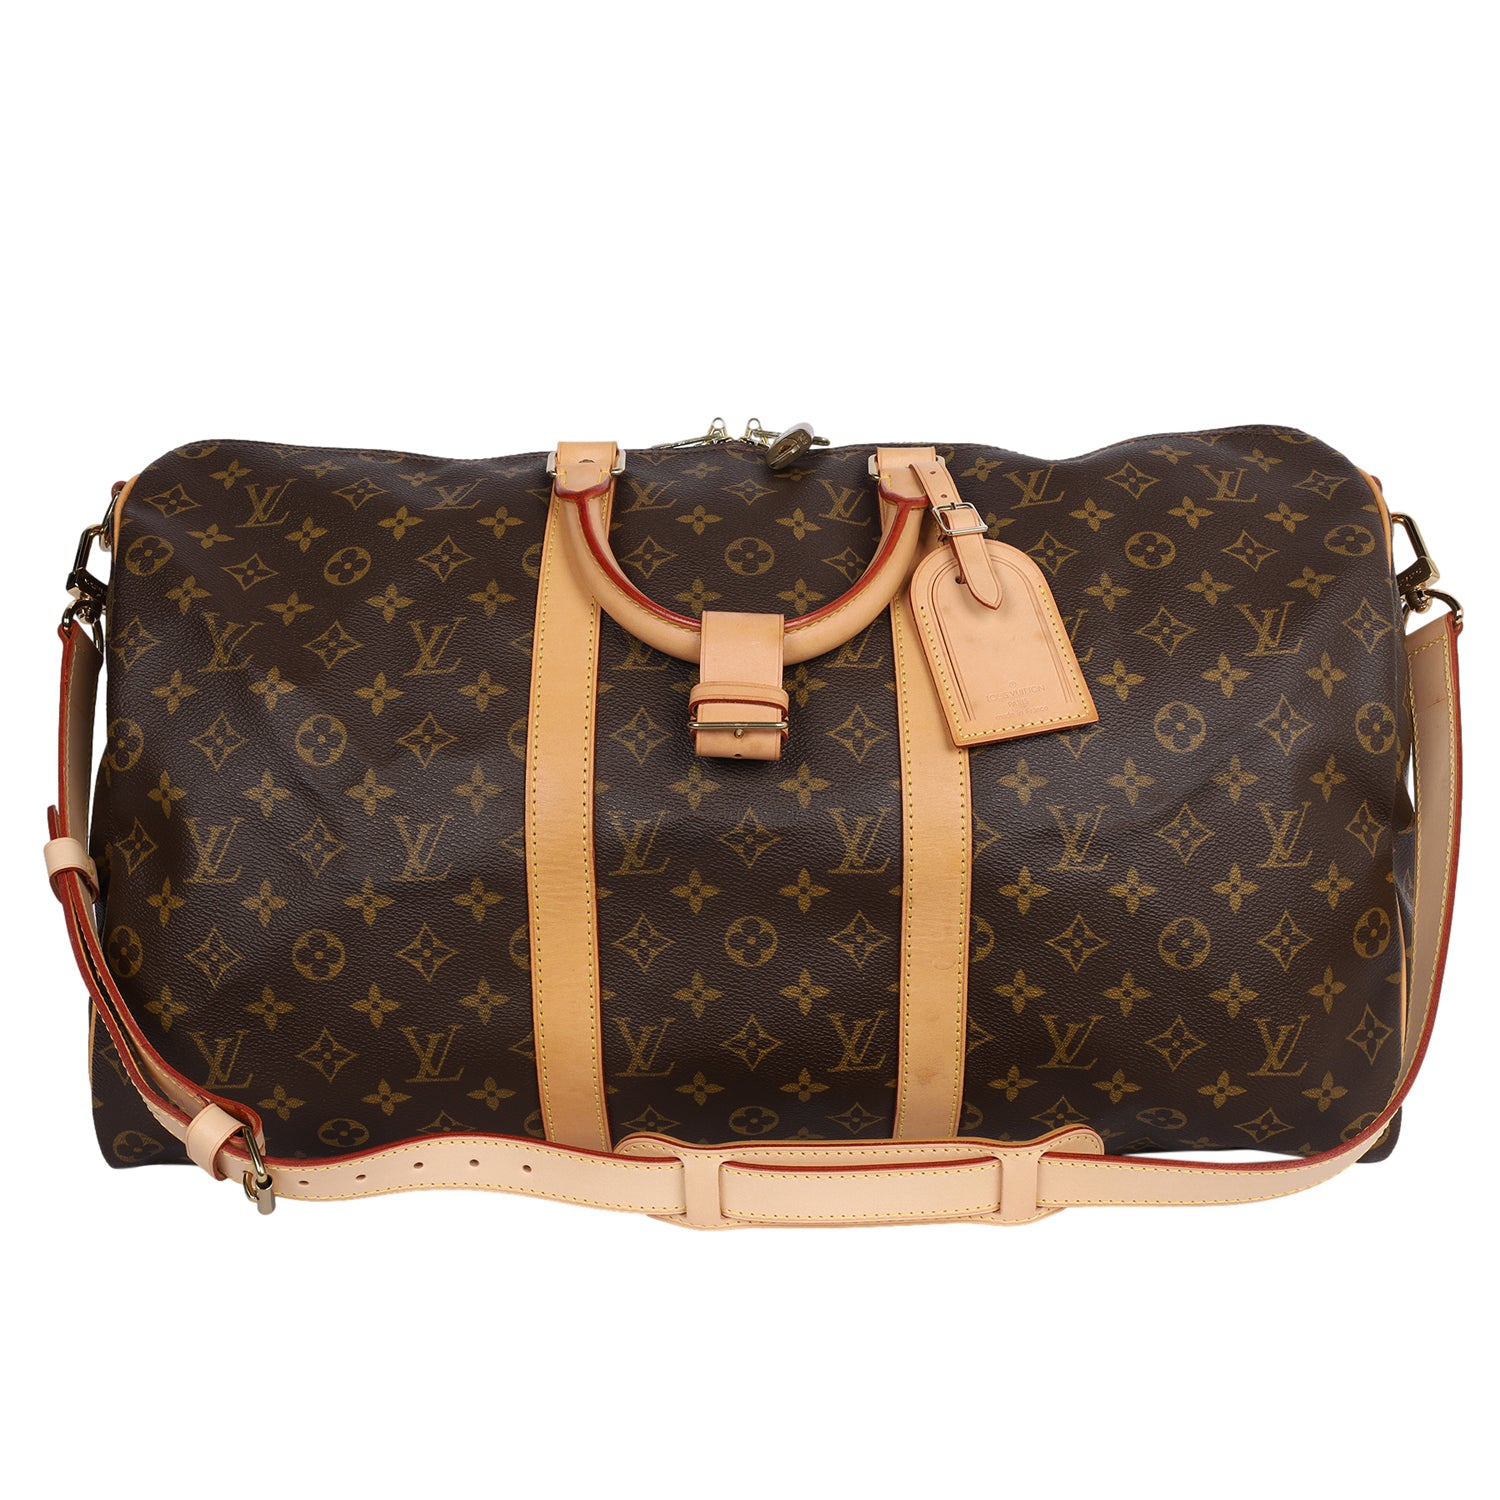 Keepall 45 Bandouliere  Used & Preloved Louis Vuitton Travel Bag